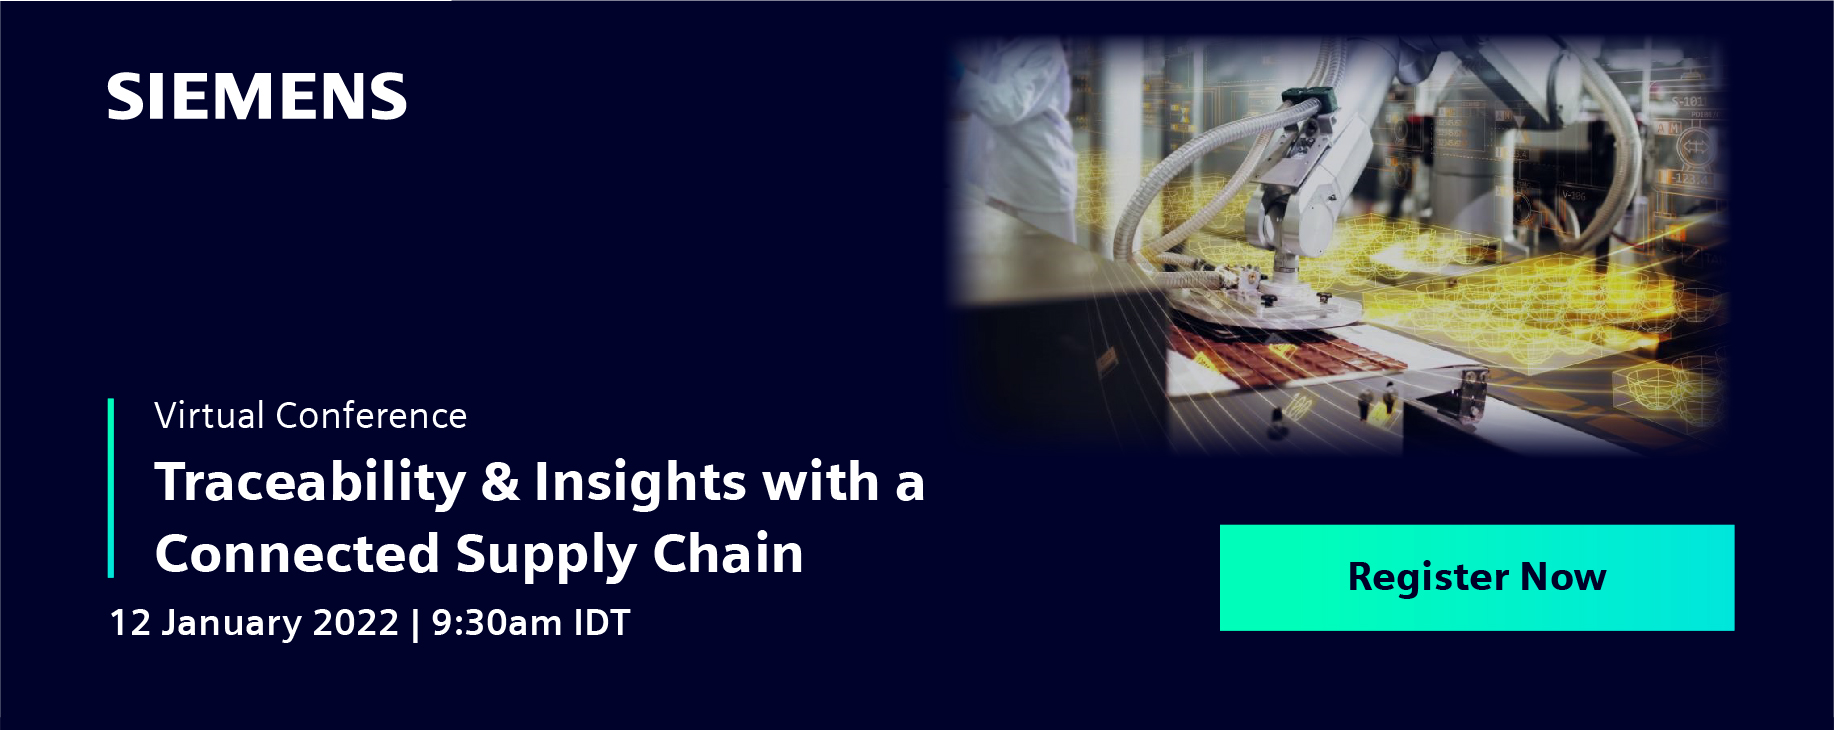 Traceability & Insights with a Connected Supply Chain